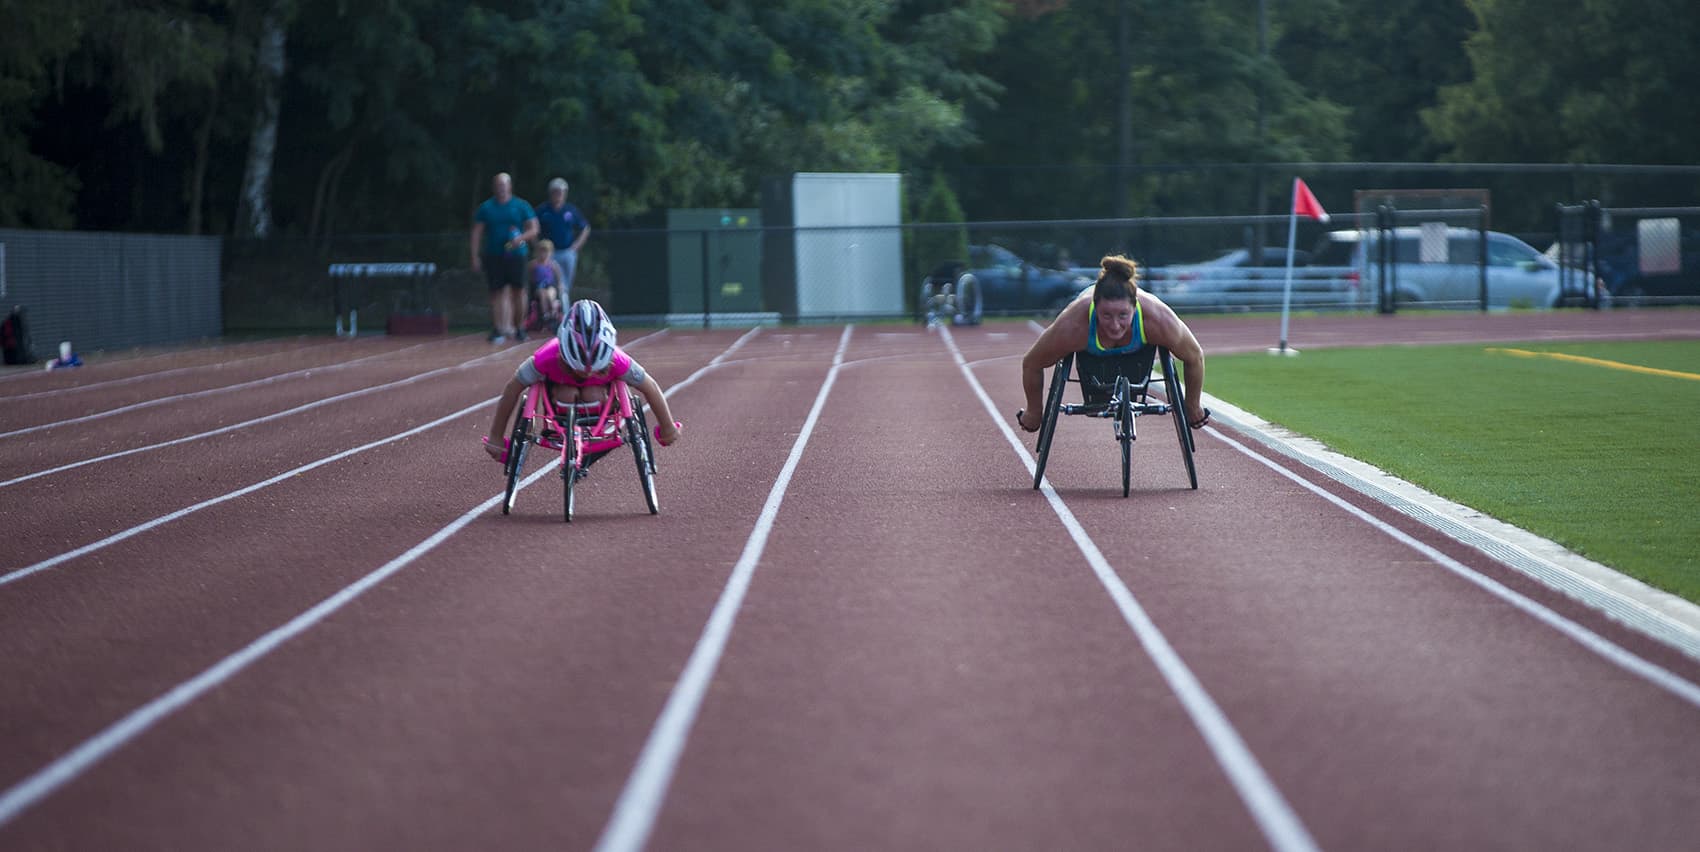 Maddie Wilson, left, and Tatyana McFadden work out together at Wellesley High School, preparing for the upcoming Falmouth Road Race. (Jesse Costa/WBUR)